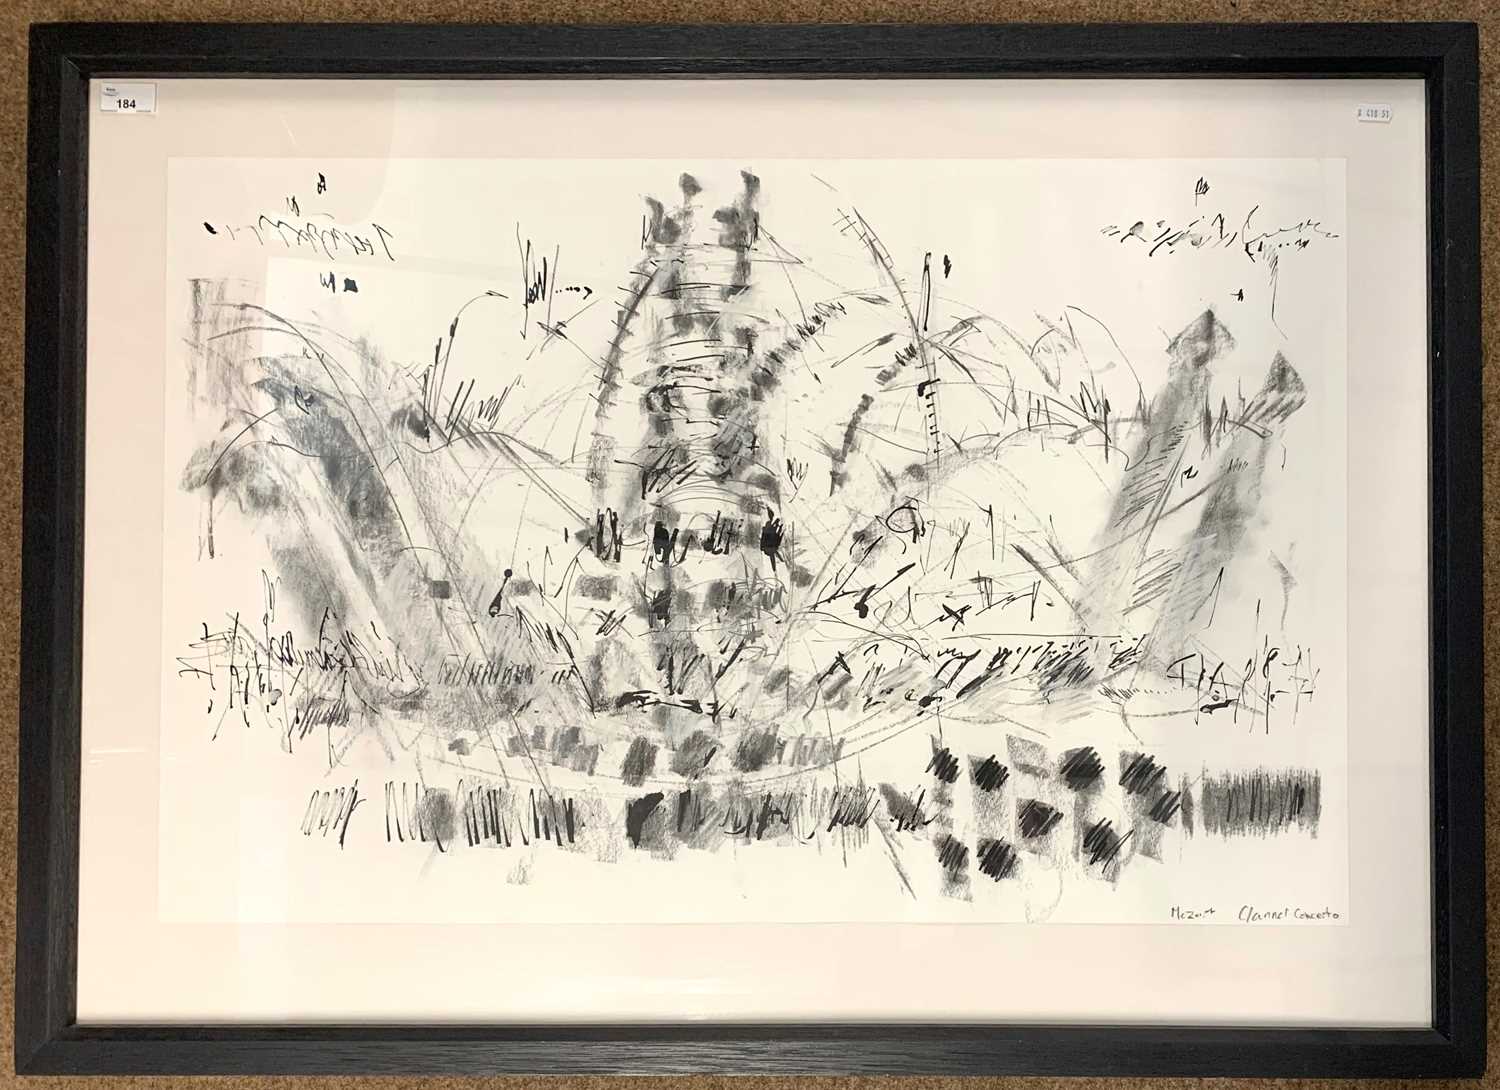 Brenda Unwin (British, contemporary), 'after Mozart Clarinet Concerto', drawing made during live